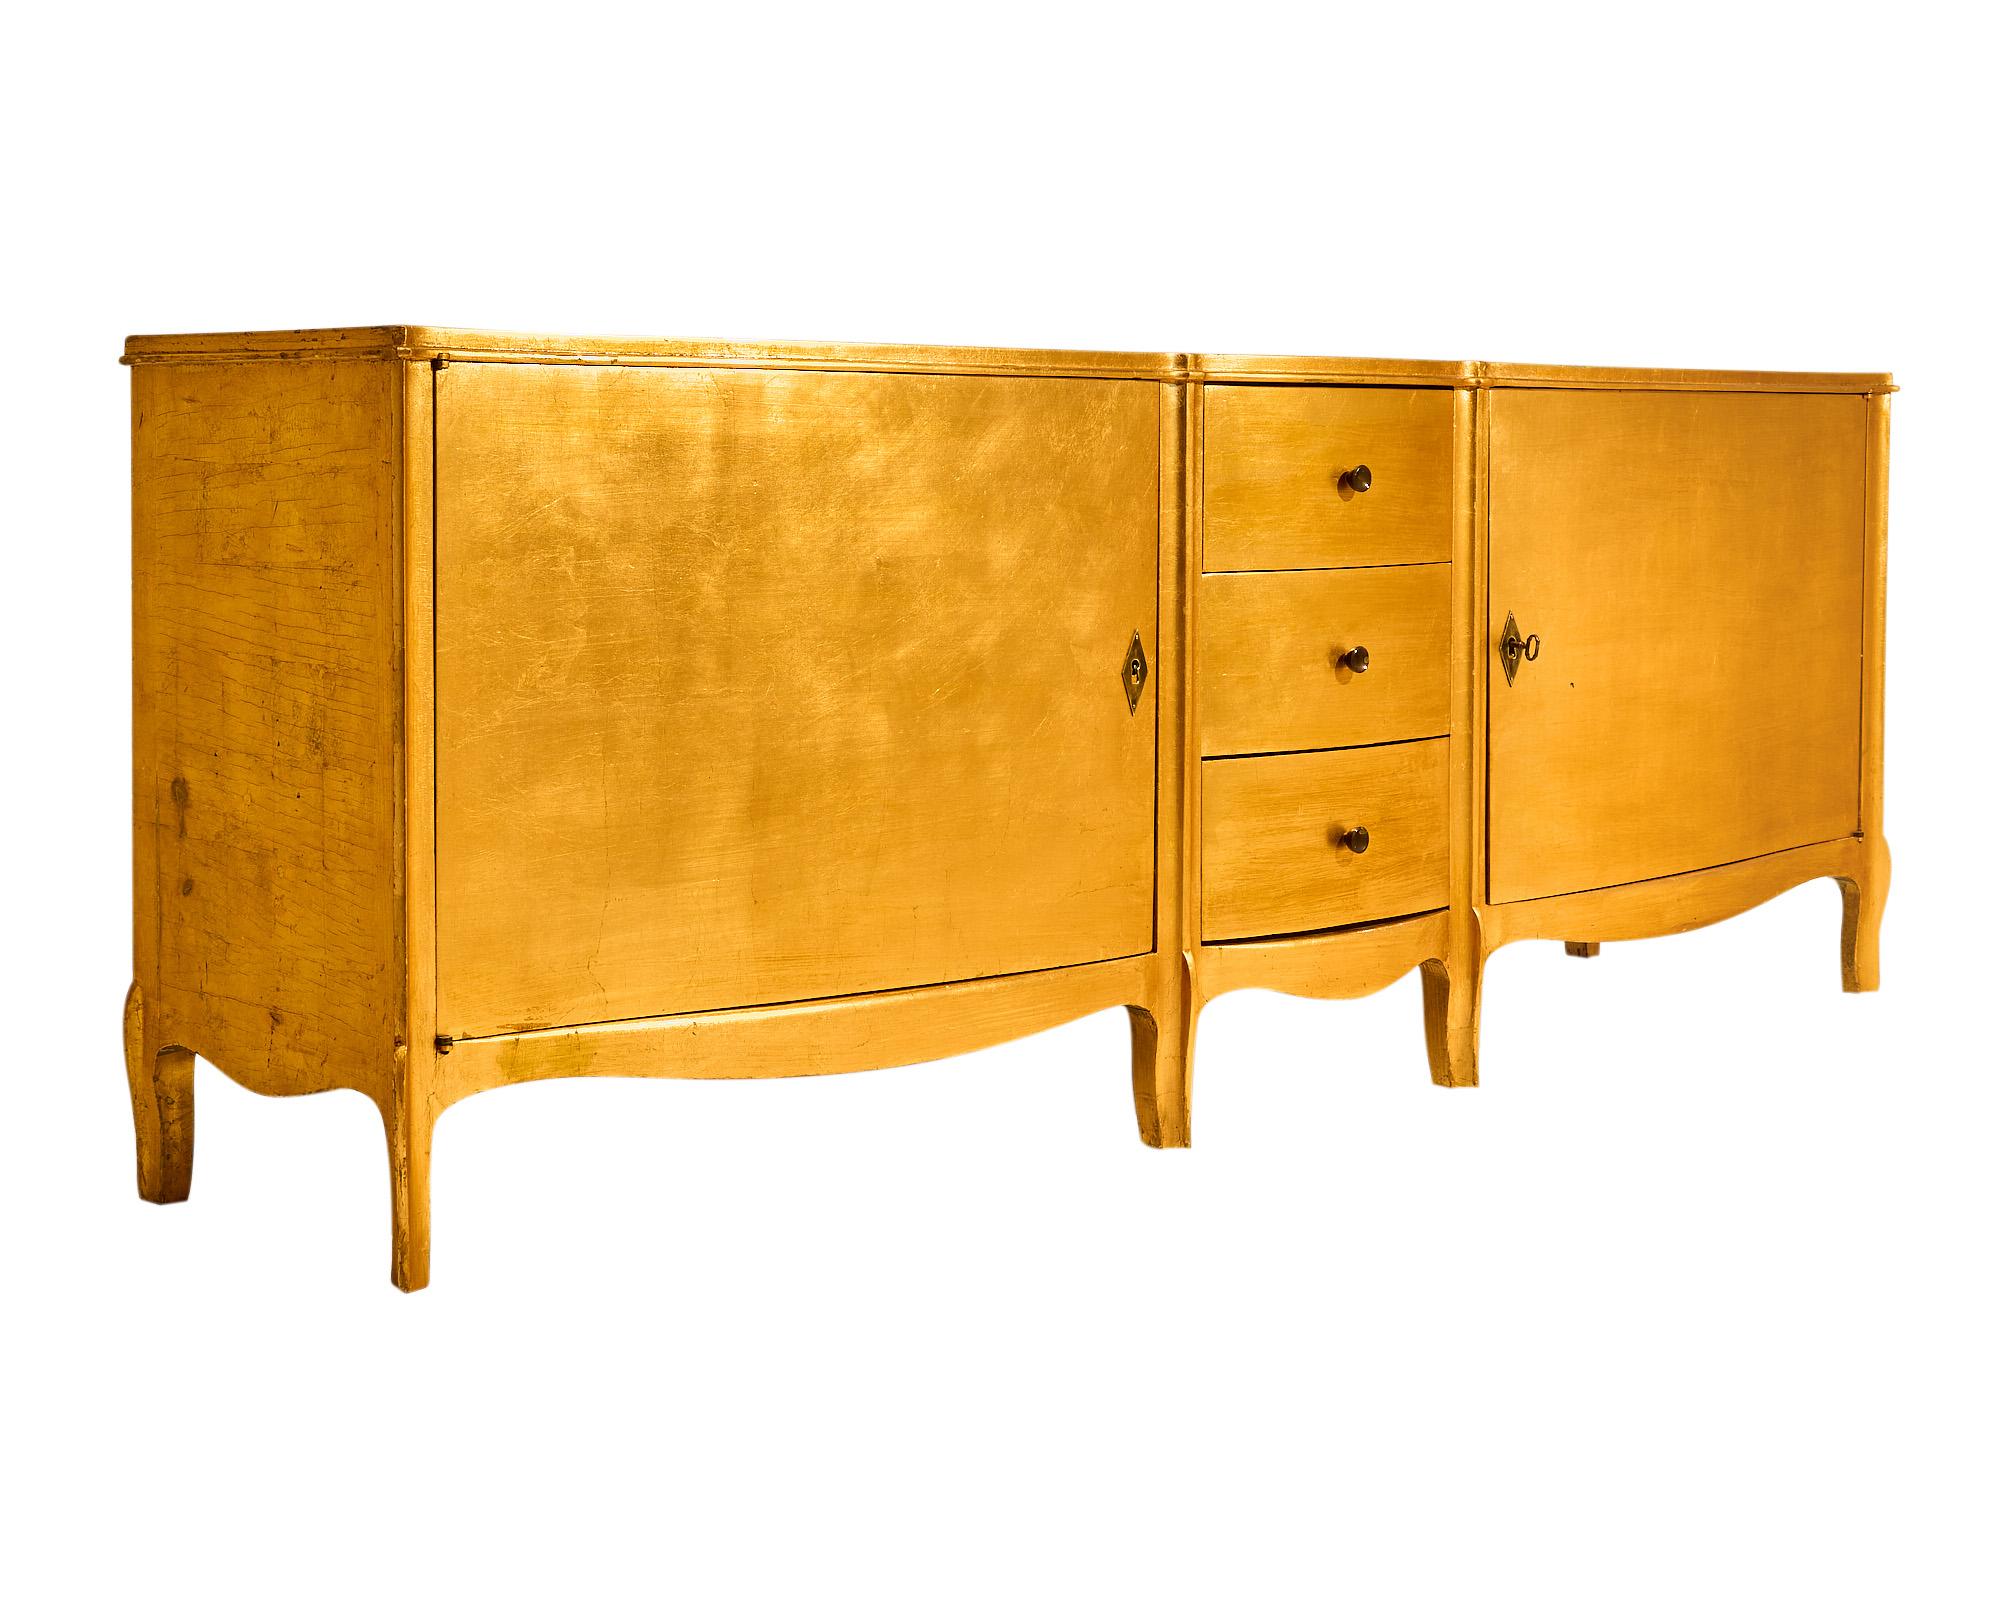 Buffet / enfilade from the Art Deco period in France made of beech wood that has been finished with a gold leaf lacquer. There are two doors that open to interior shelving and four dovetailed drawers down the center. We love the Art Deco curves of